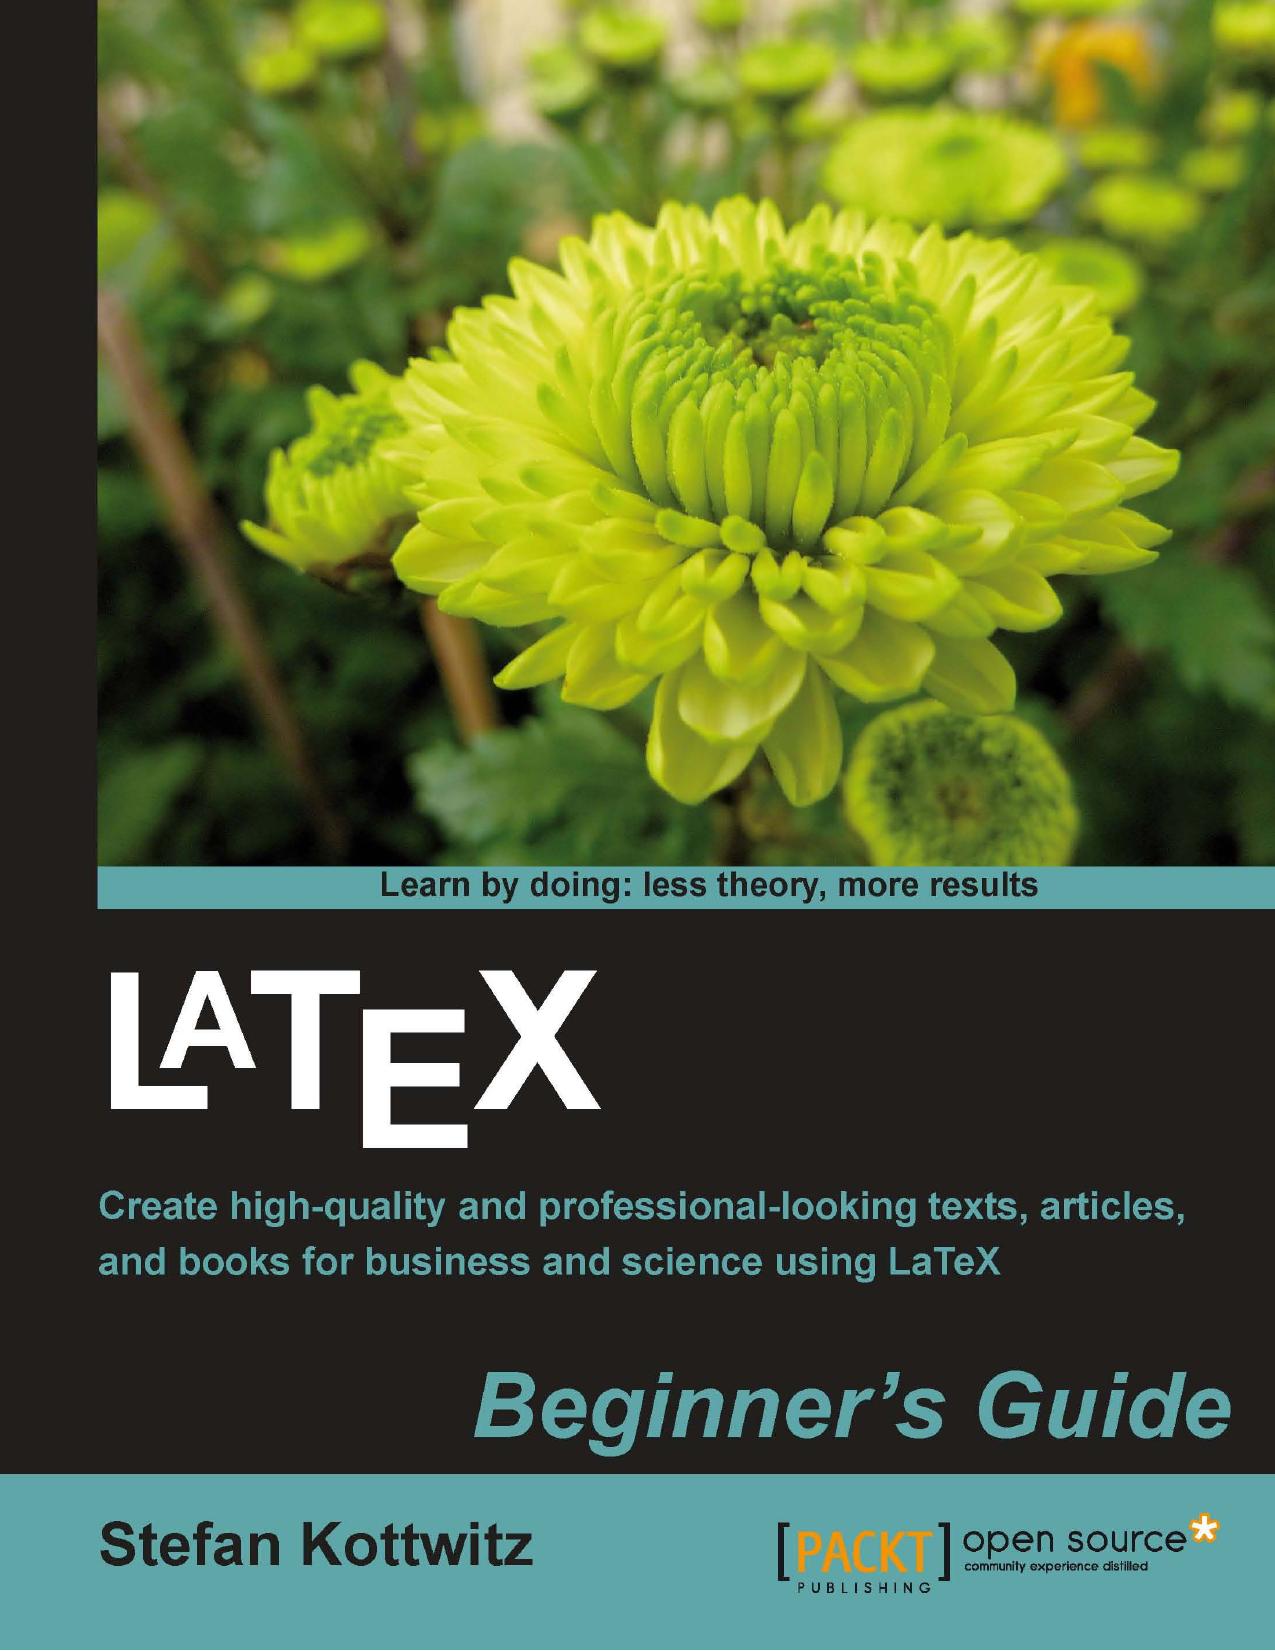 LaTeX Beginners Guide Create Visually Appealing Texts, Articles, and Books for Business and Science Using LaTeX